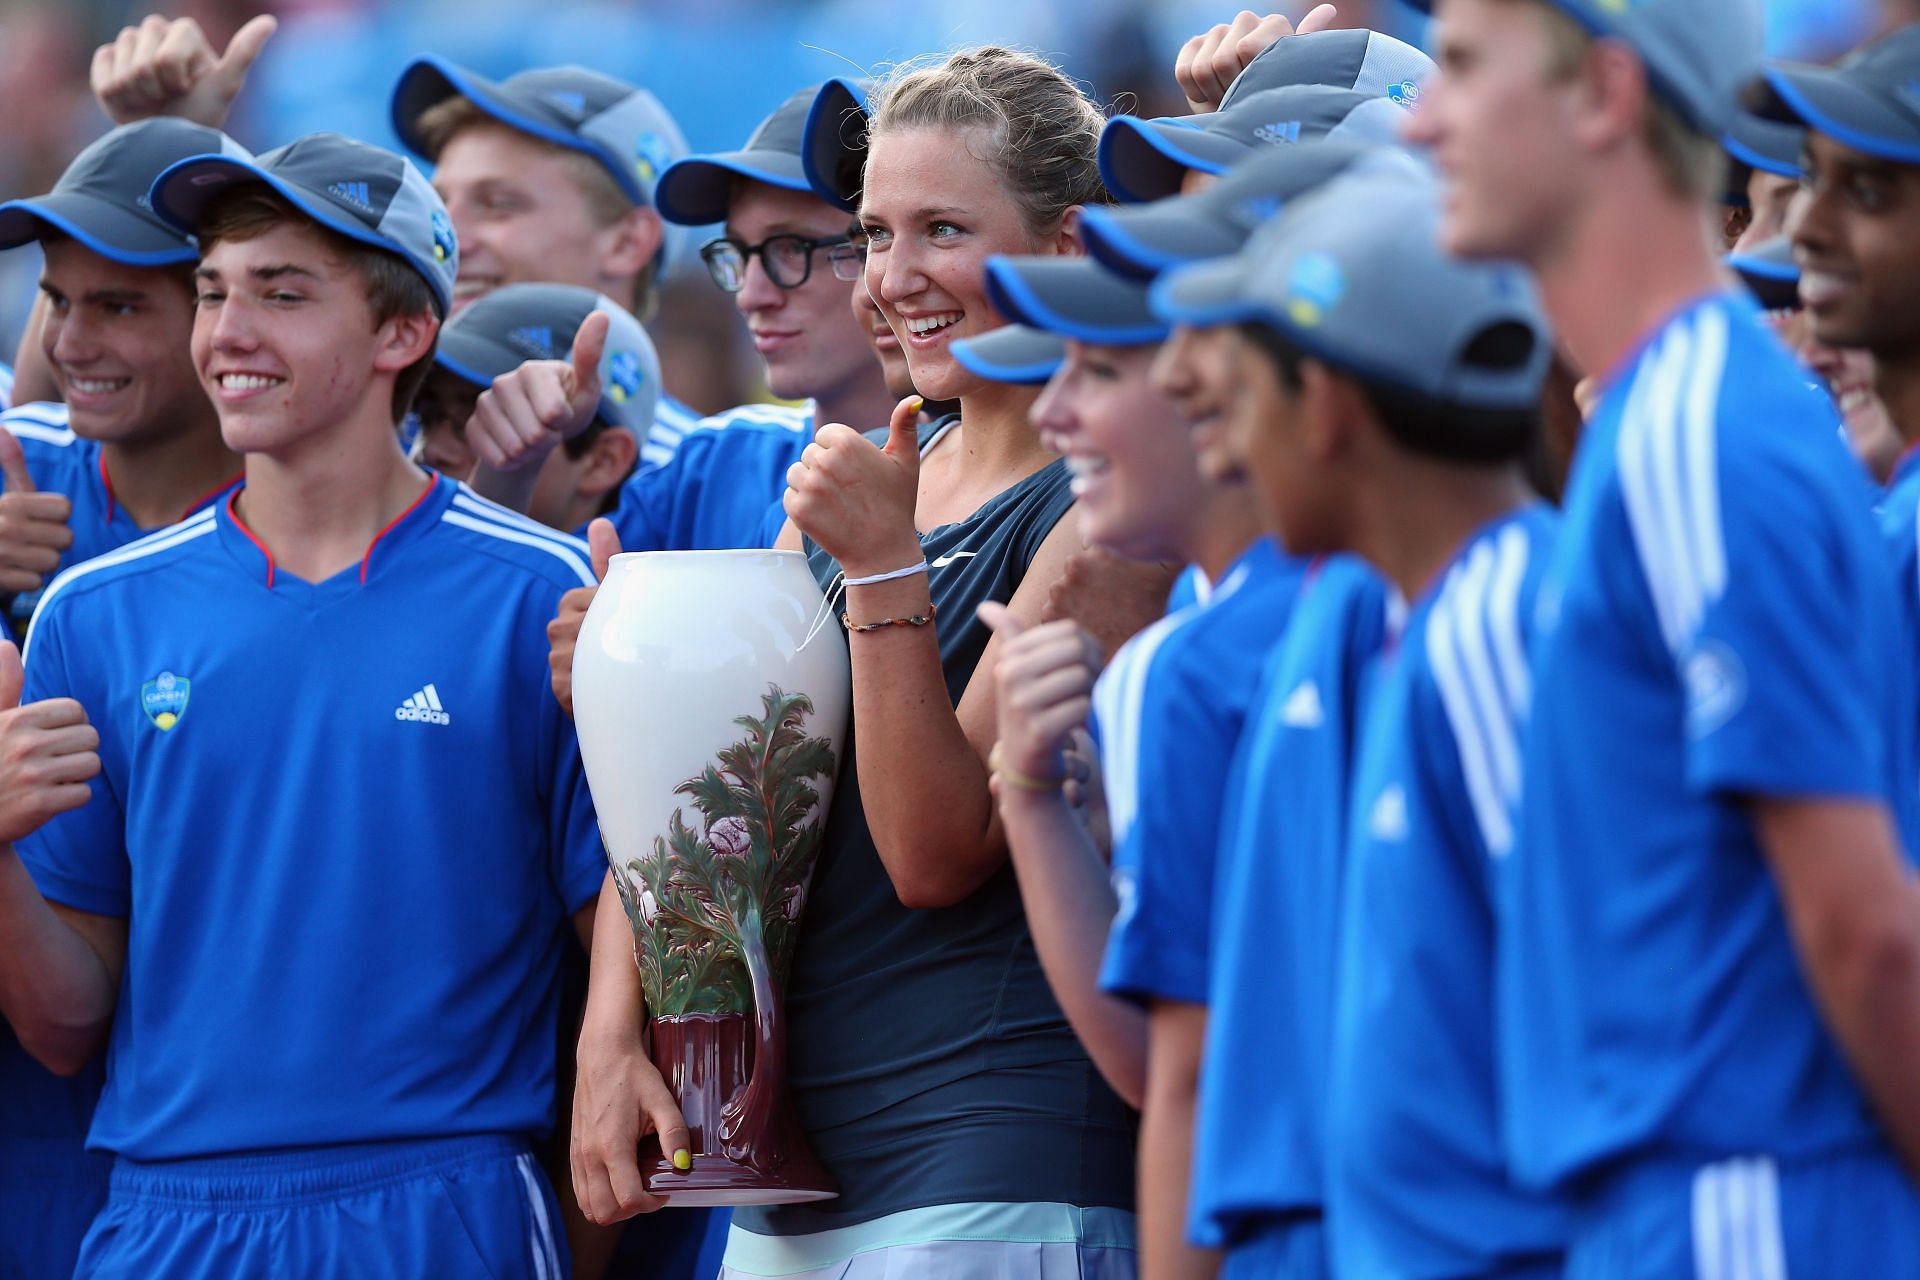 Azarenka is a two-time Cincinnati Open champion, having lifted the title in 2013 and more recently in 2020